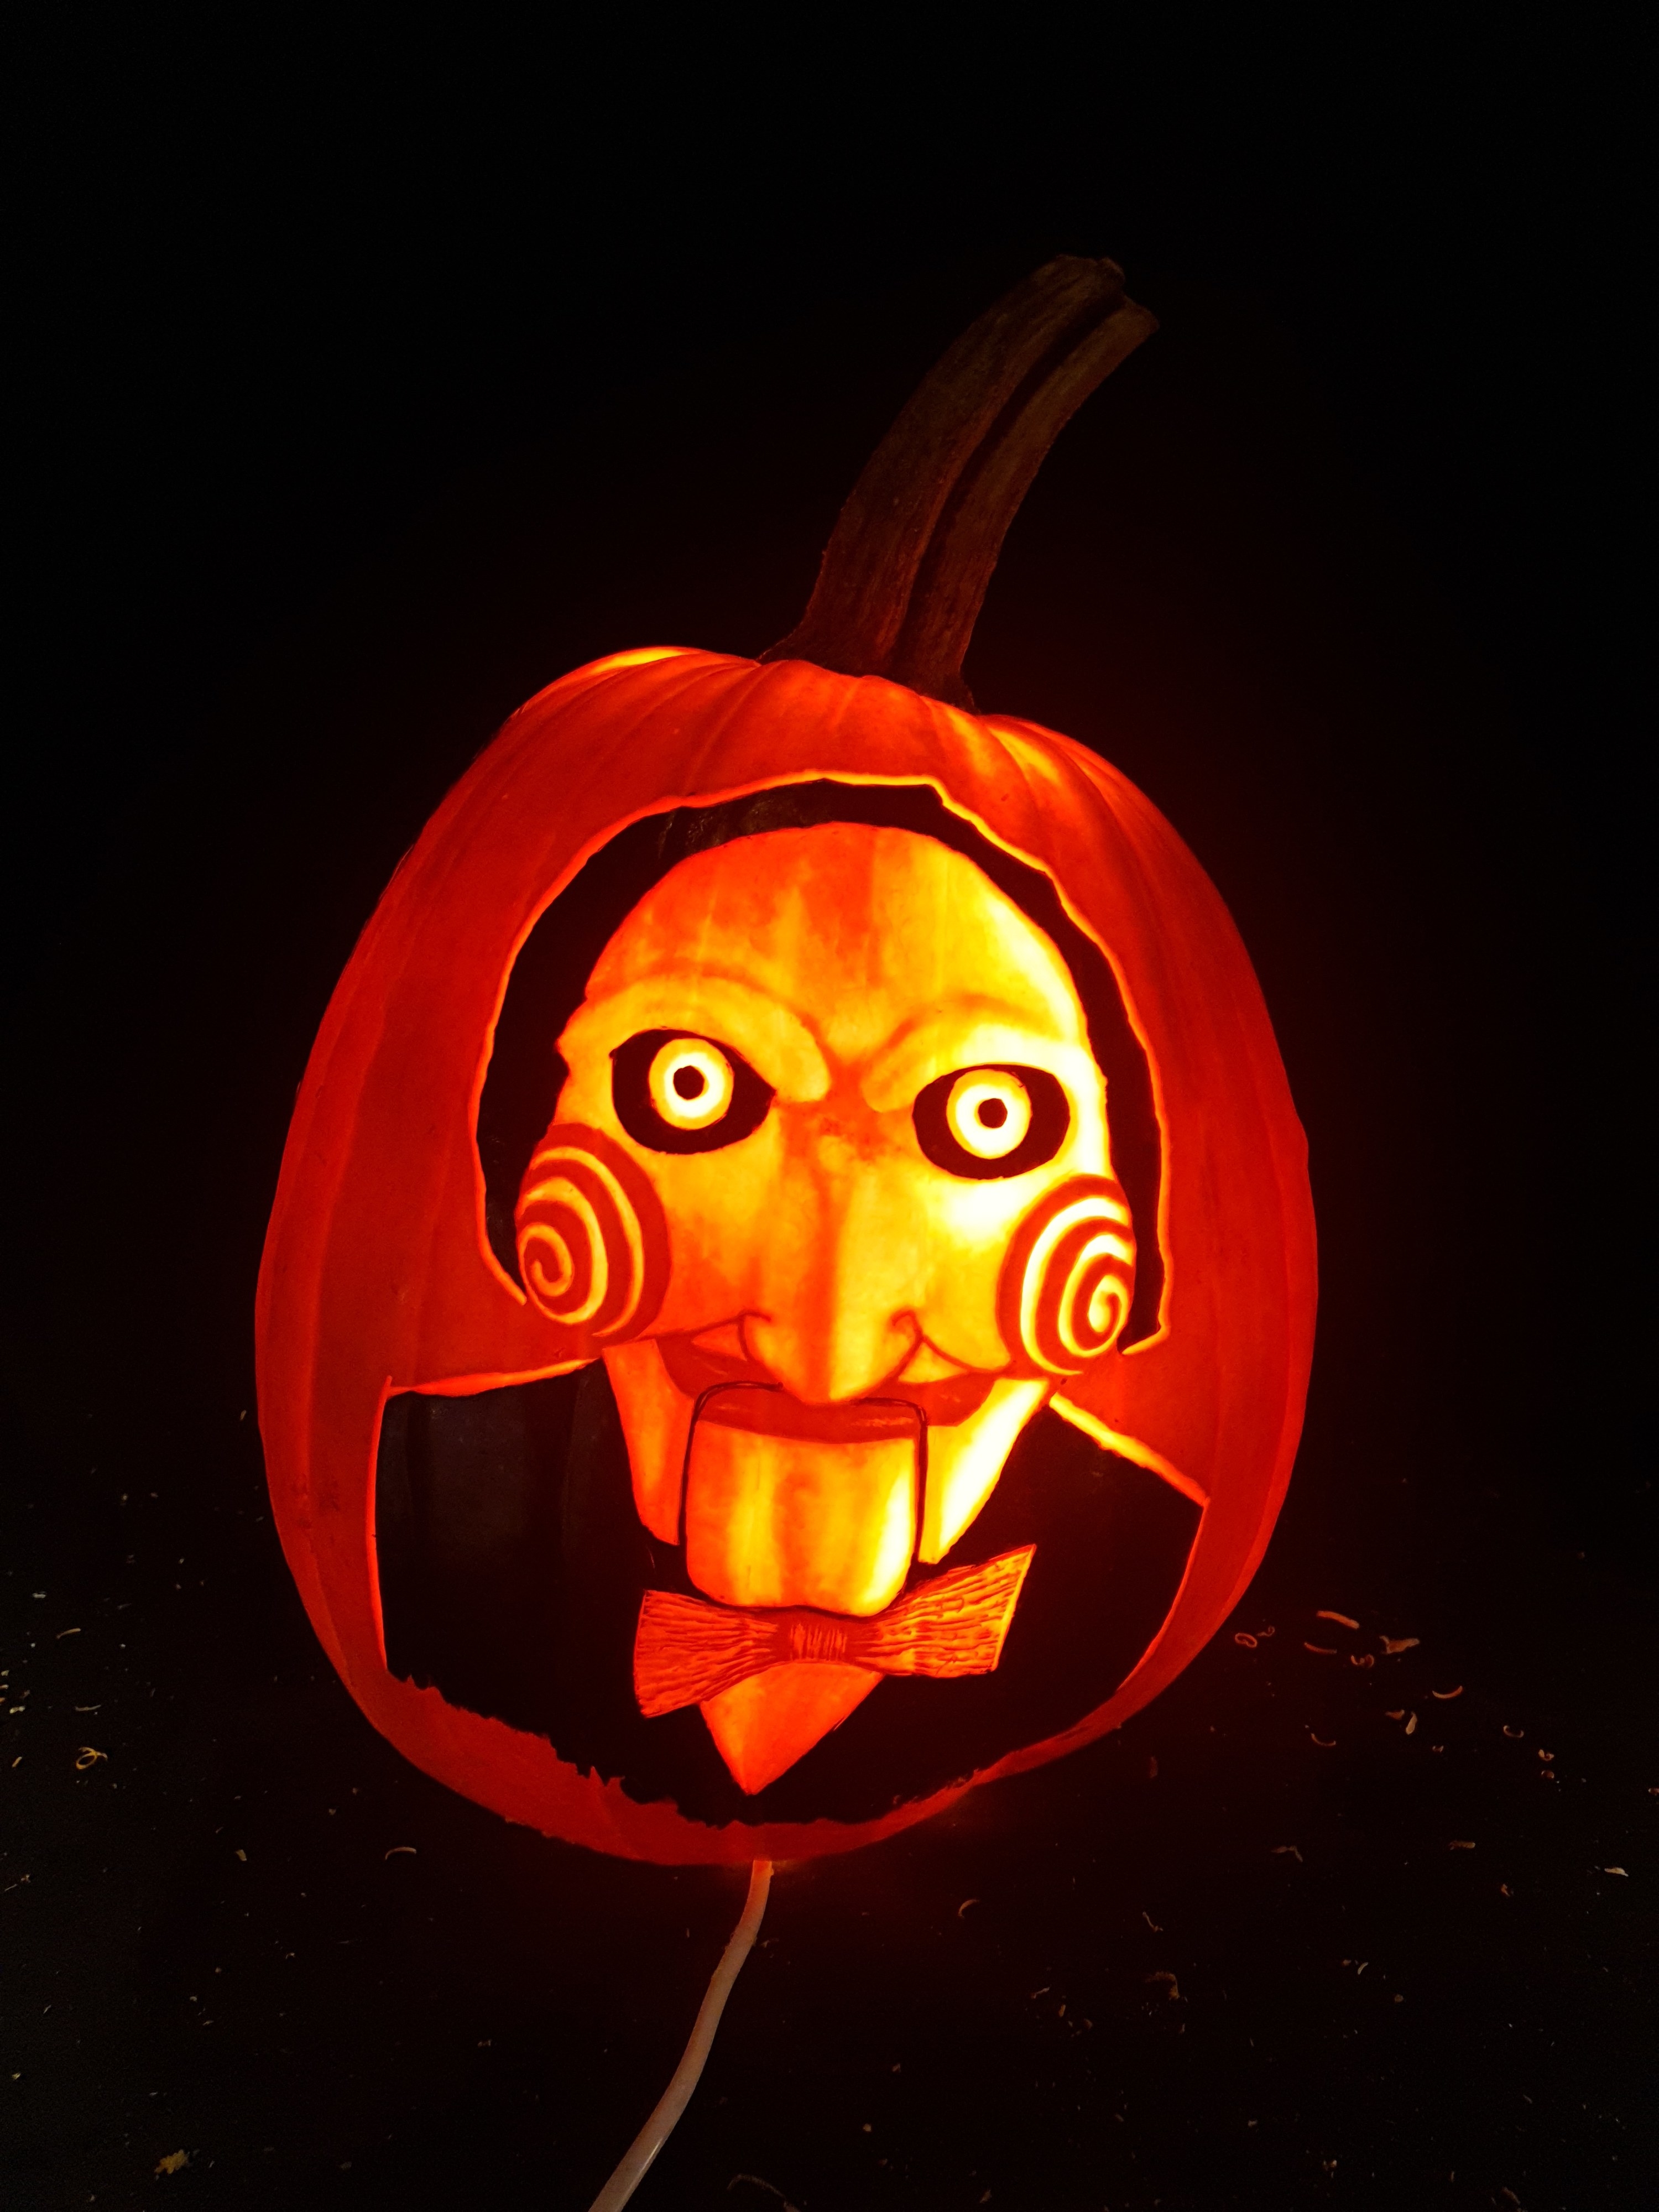 Billy from Saw carved on a pumpkin